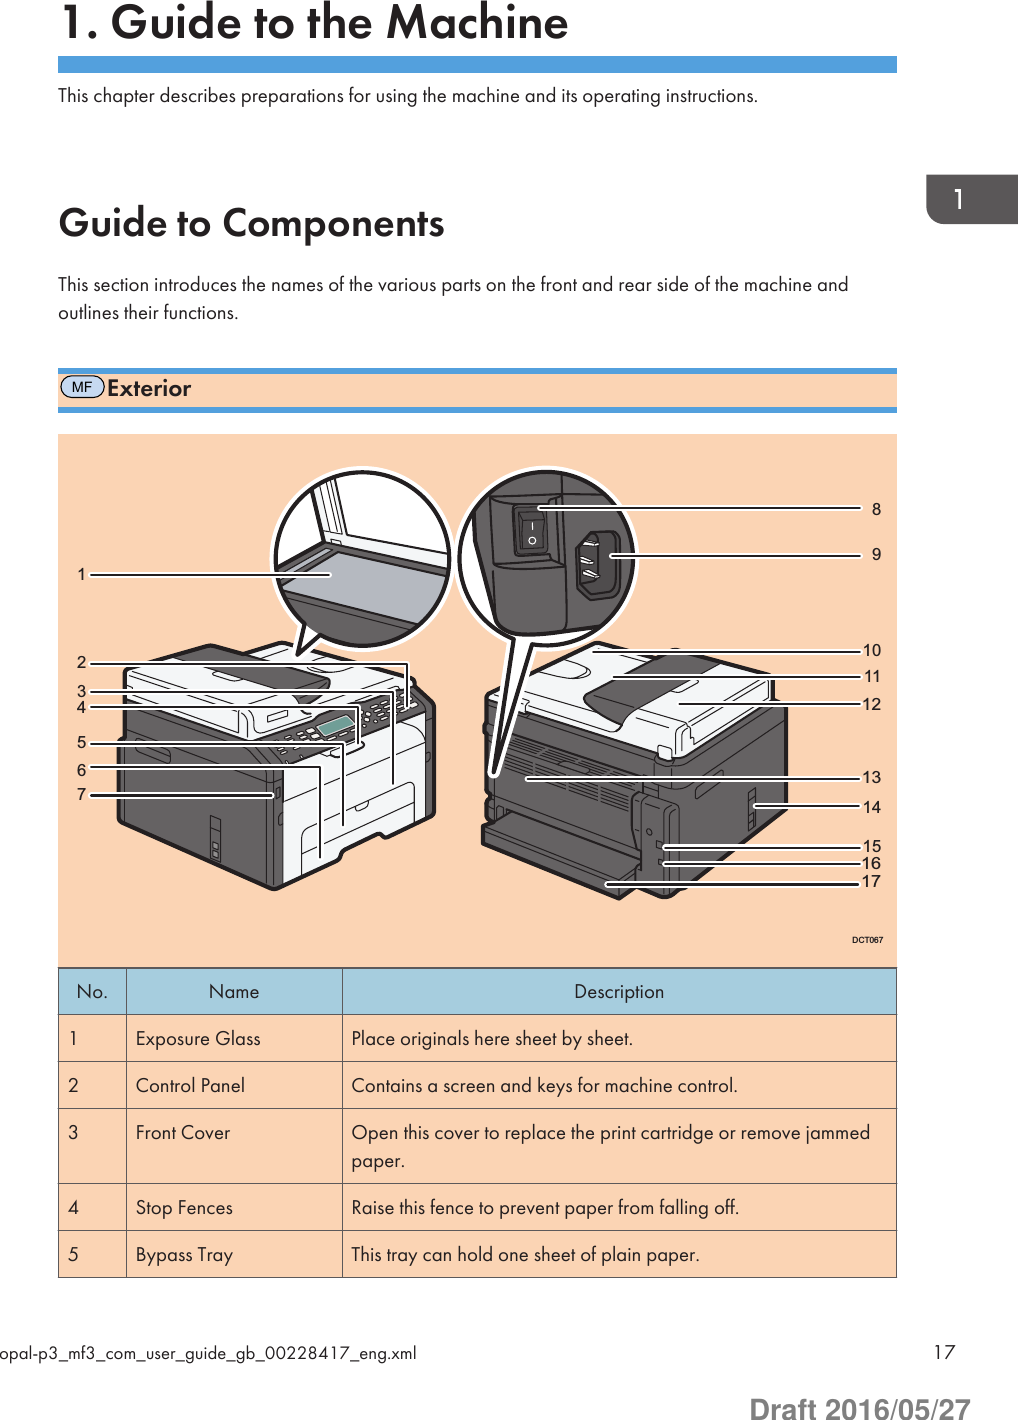 1. Guide to the MachineThis chapter describes preparations for using the machine and its operating instructions.Guide to ComponentsThis section introduces the names of the various parts on the front and rear side of the machine andoutlines their functions.MFExteriorDCT0672816374591011141312161517No. Name Description1 Exposure Glass Place originals here sheet by sheet.2 Control Panel Contains a screen and keys for machine control.3 Front Cover Open this cover to replace the print cartridge or remove jammedpaper.4 Stop Fences Raise this fence to prevent paper from falling off.5 Bypass Tray This tray can hold one sheet of plain paper.opal-p3_mf3_com_user_guide_gb_00228417_eng.xml 17Draft 2016/05/27